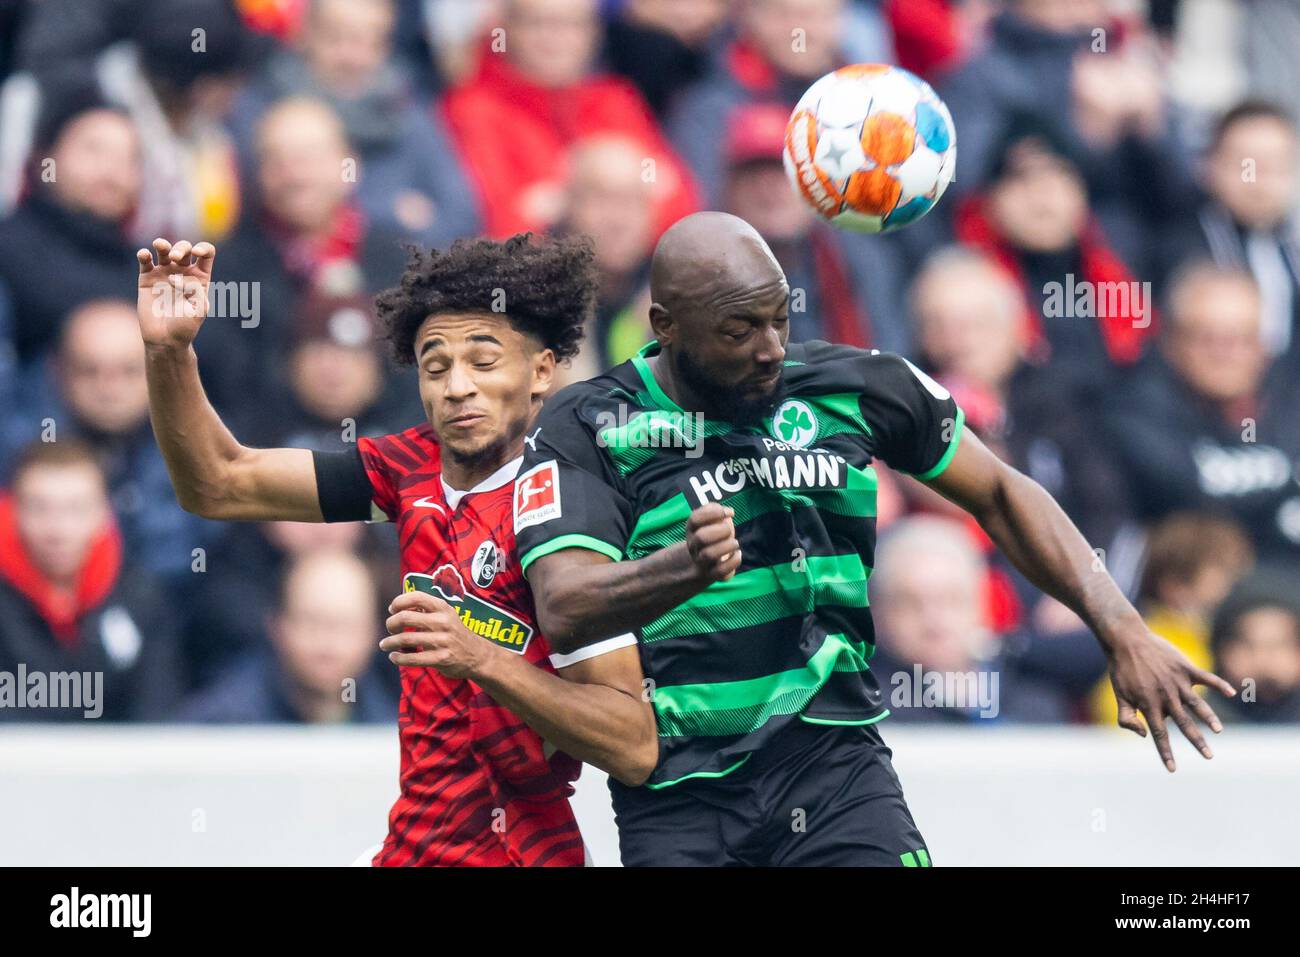 30 October 2021, Baden-Wuerttemberg, Freiburg im Breisgau: Football: Bundesliga, SC Freiburg - SpVgg Greuther Fürth, Matchday 10, Europa-Park Stadion. Freiburg's Kevin Schade (l) in action against Fürth's Jetro Willems (r). IMPORTANT NOTE: In accordance with the regulations of the DFL Deutsche Fußball Liga and the DFB Deutscher Fußball-Bund, it is prohibited to use or have used photographs taken in the stadium and/or of the match in the form of sequence pictures and/or video-like photo series. Photo: Tom Weller/dpa - IMPORTANT NOTE: In accordance with the regulations of the DFL Deutsche Fußbal Stock Photo